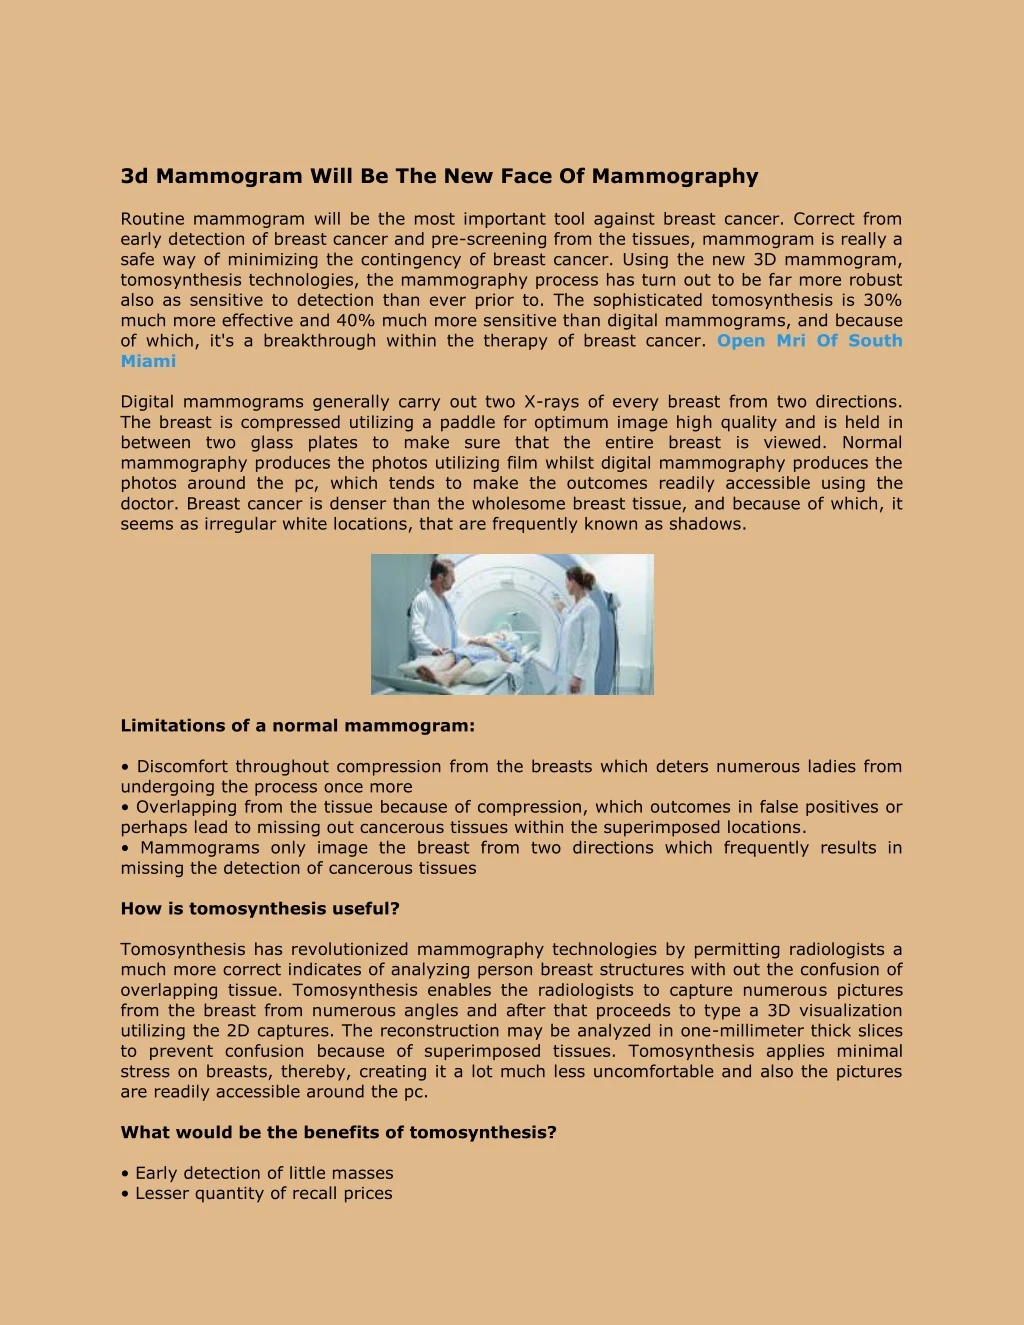 3d mammogram will be the new face of mammography